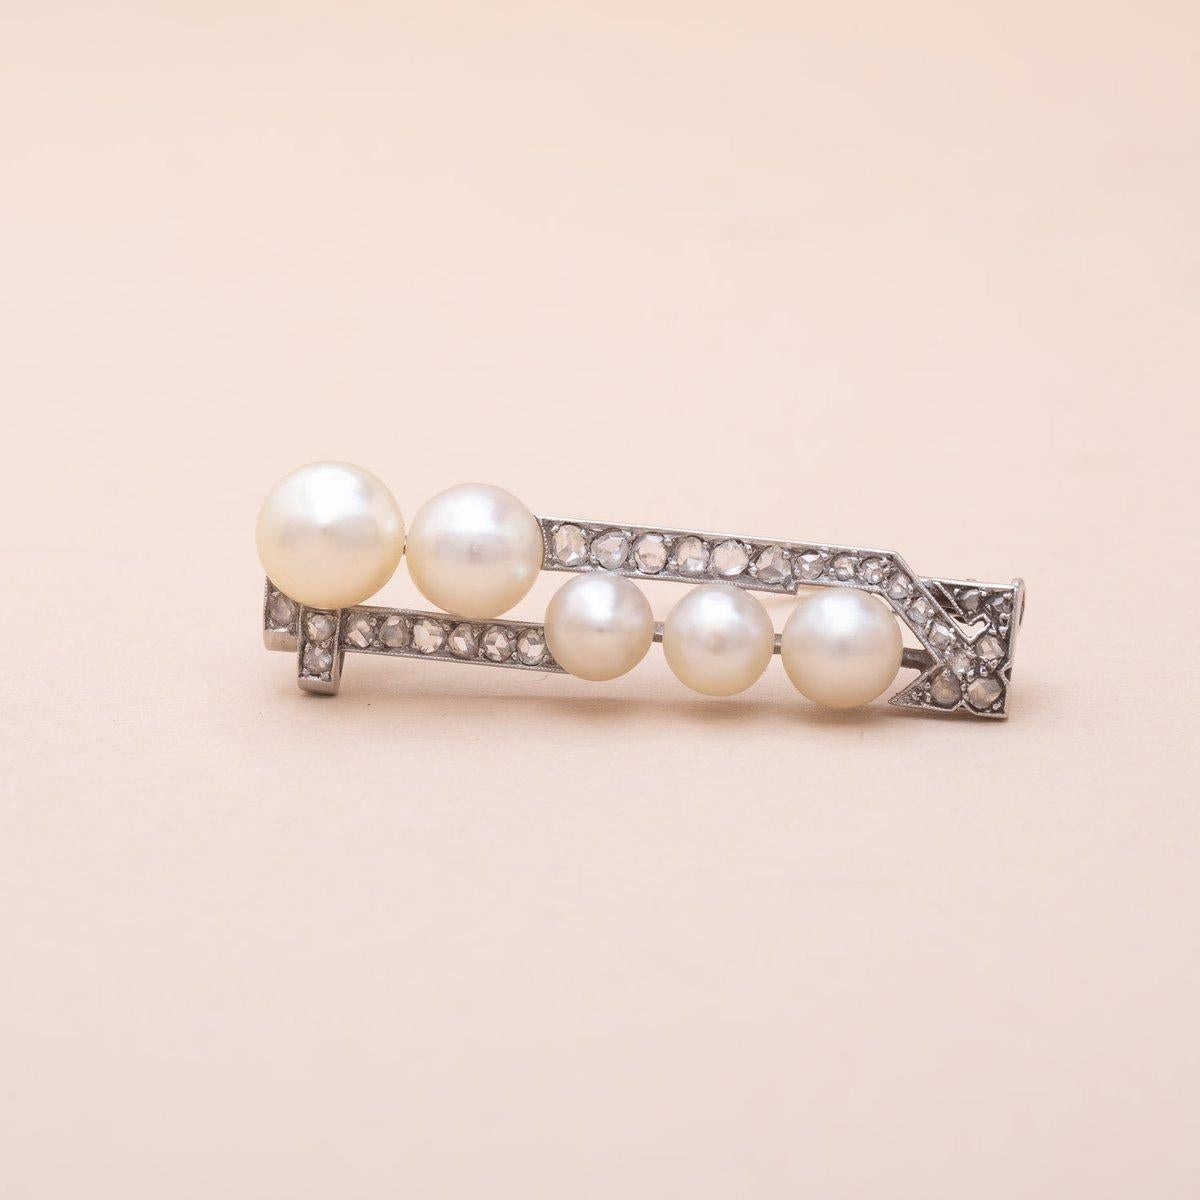 18K gold, platinum, rose-cut diamonds and Natural pearls Art Déco barrette brooch 
Natural pearls (LFG test undergoing) 
French craftsmanship from the 1920s 
Eagle's head and dog's head hallmark 
Dimensions : 11x42mm
Pearl diameters : 6 to 8mm
Gross